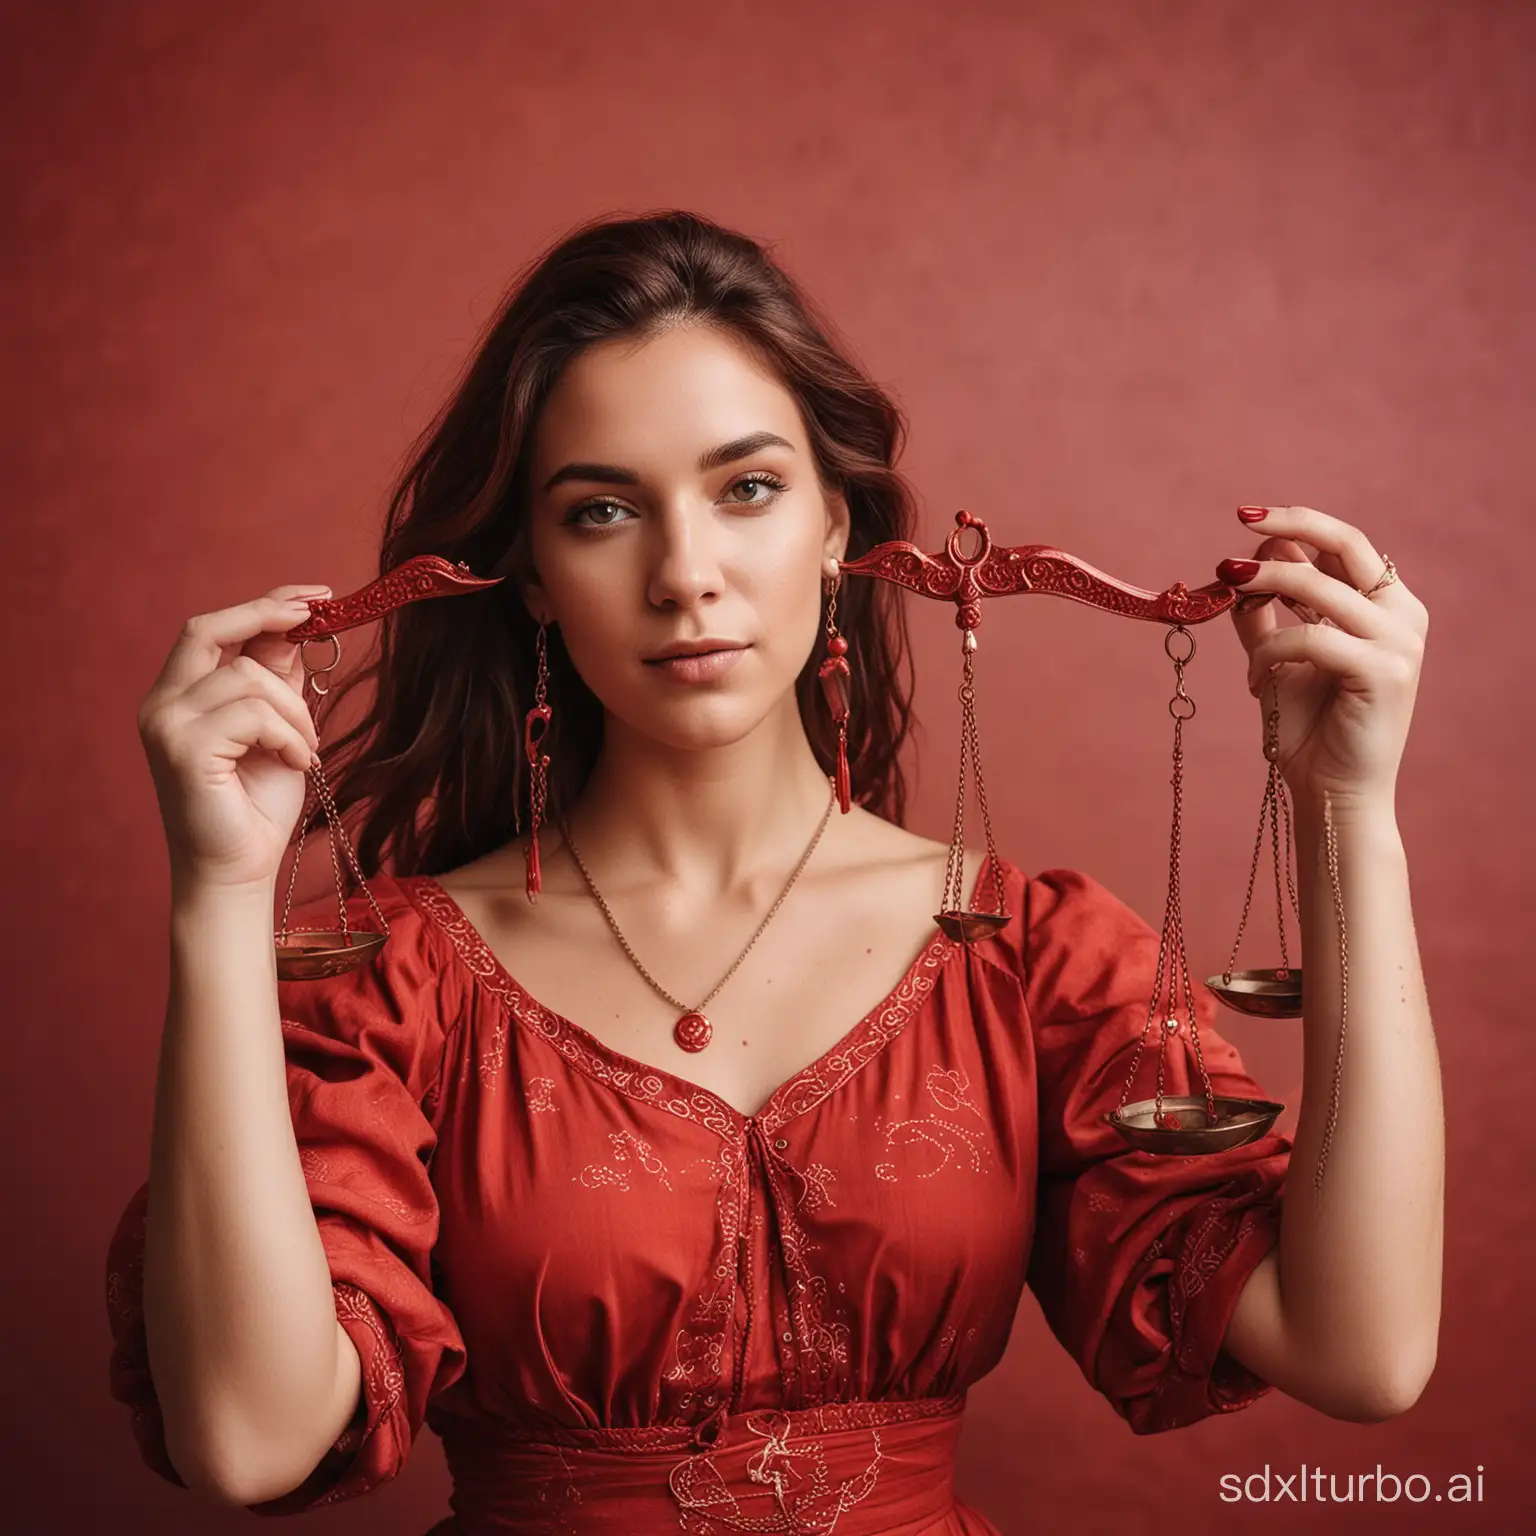 Libra-Zodiac-Woman-Holding-Scales-in-Red-Theme